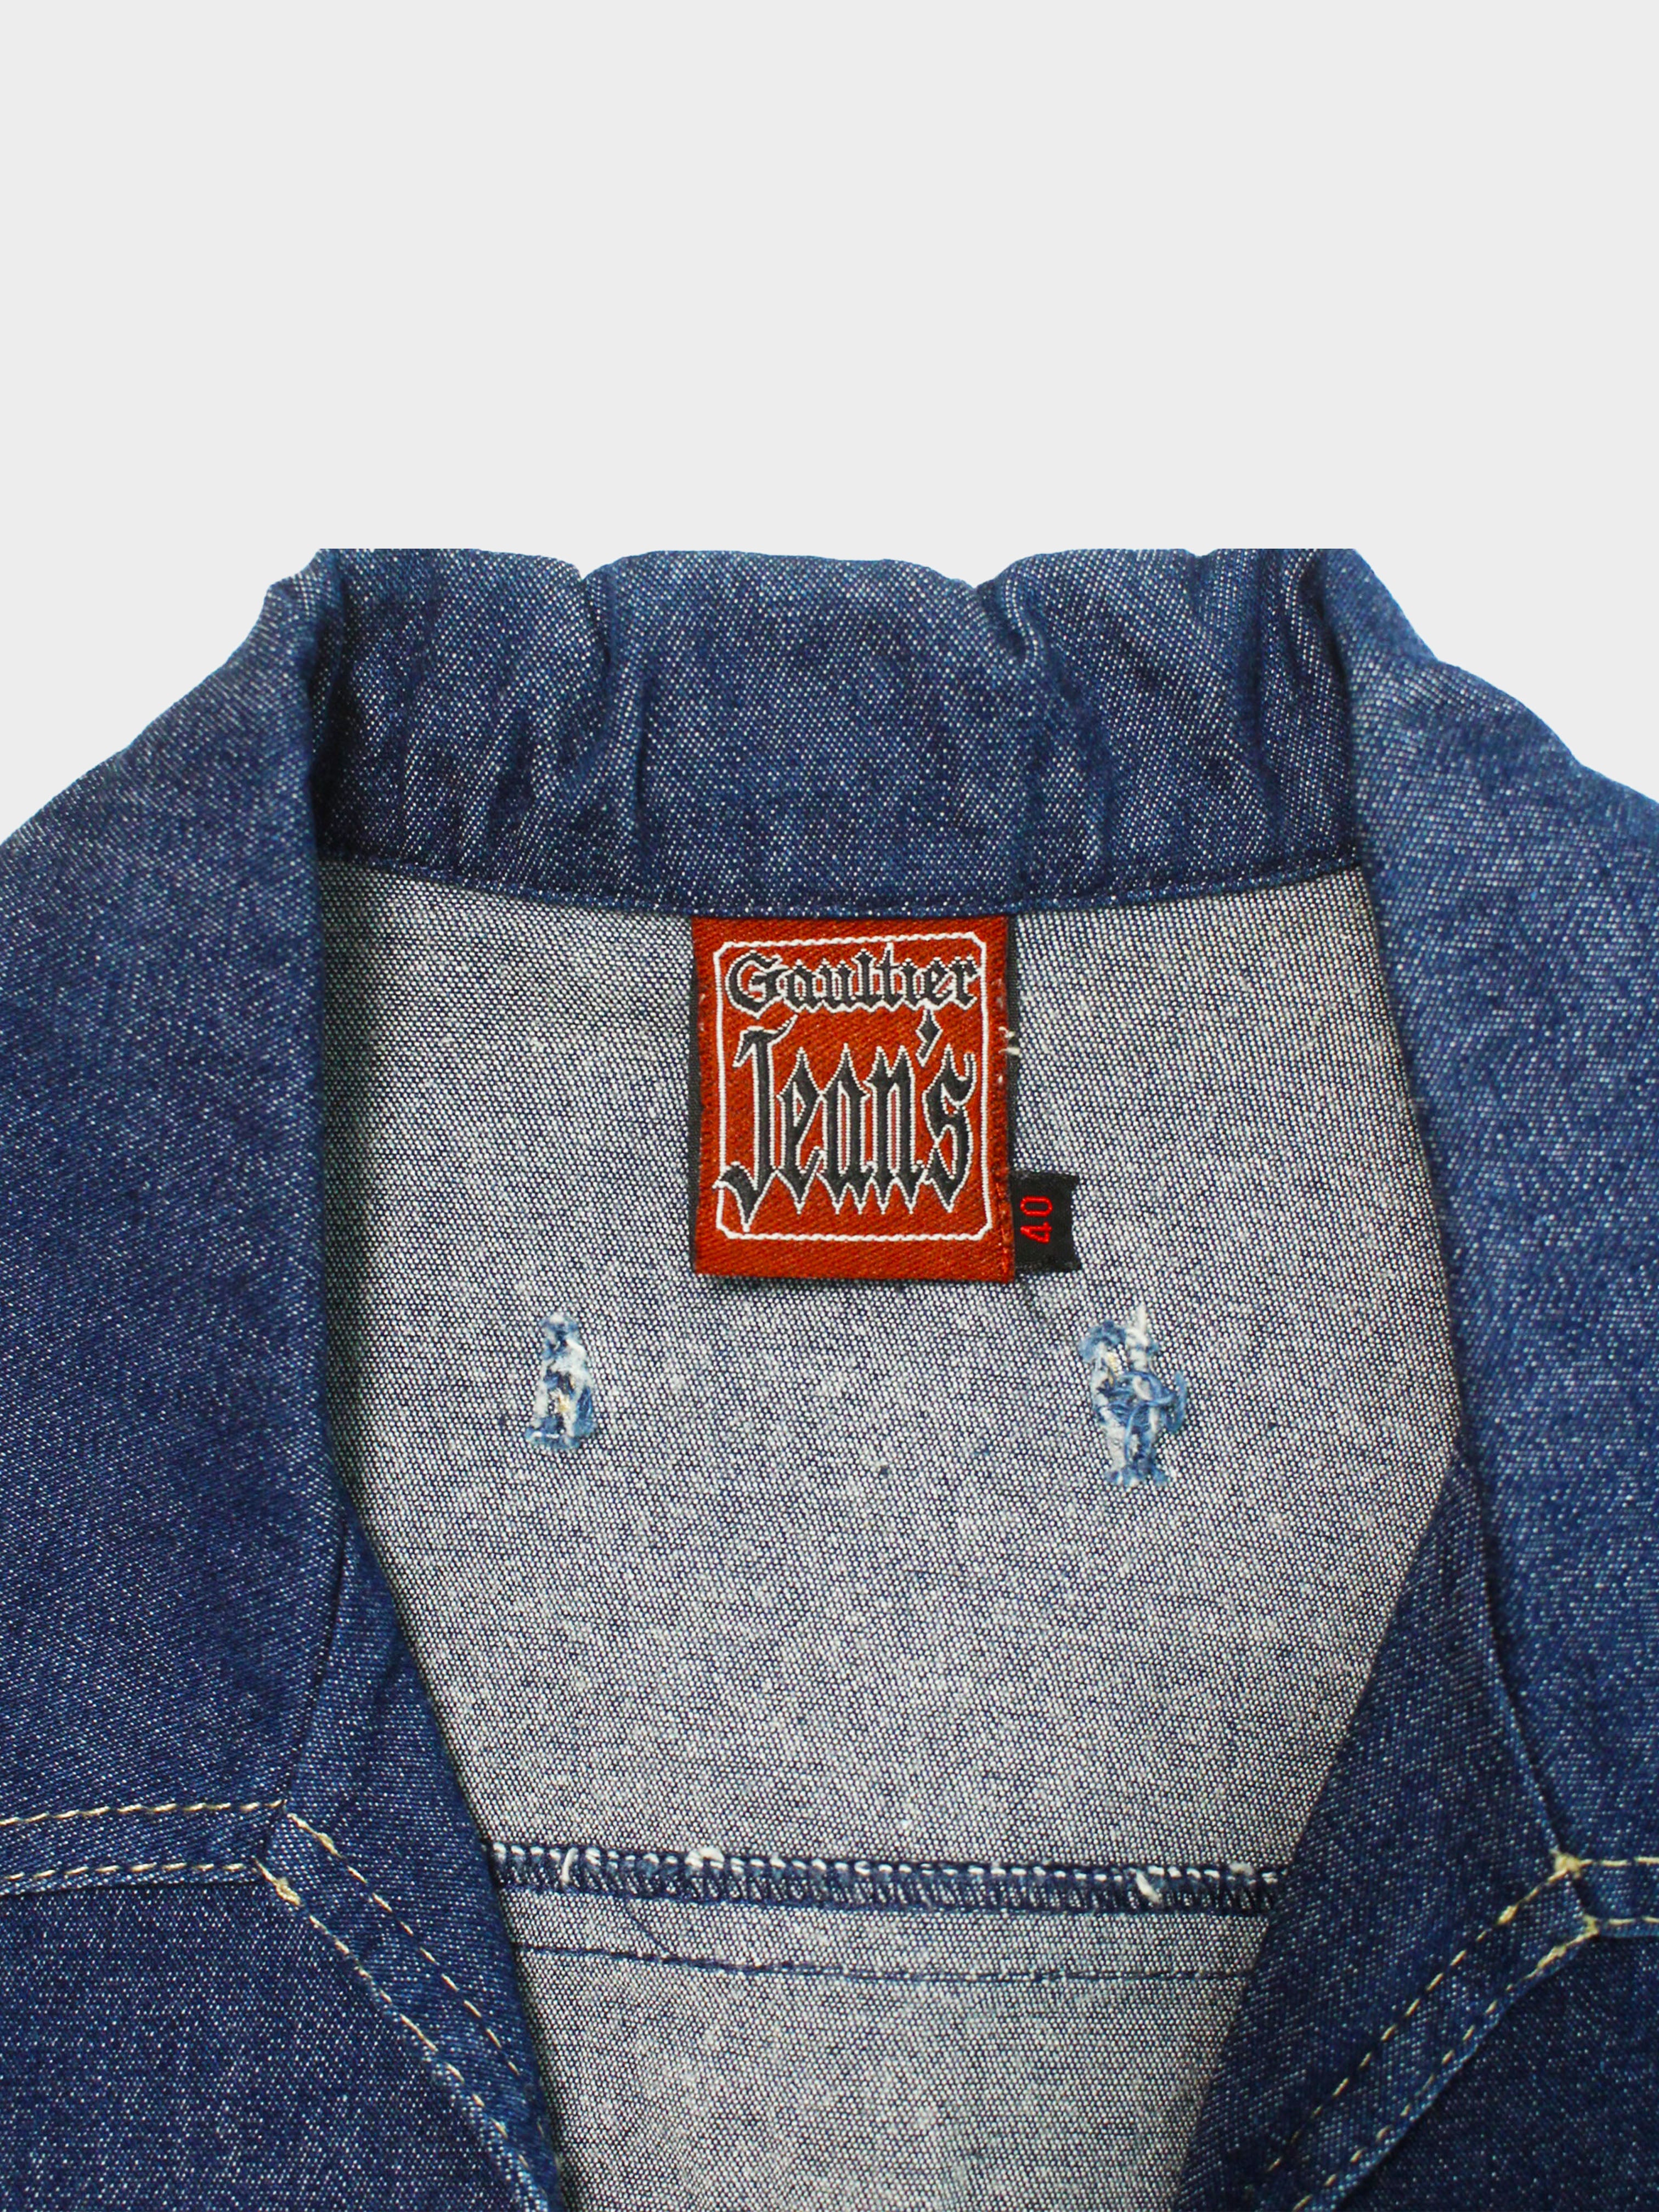 Jean Paul Gaultier 1990s Safety Pin Denim Cropped Jacket